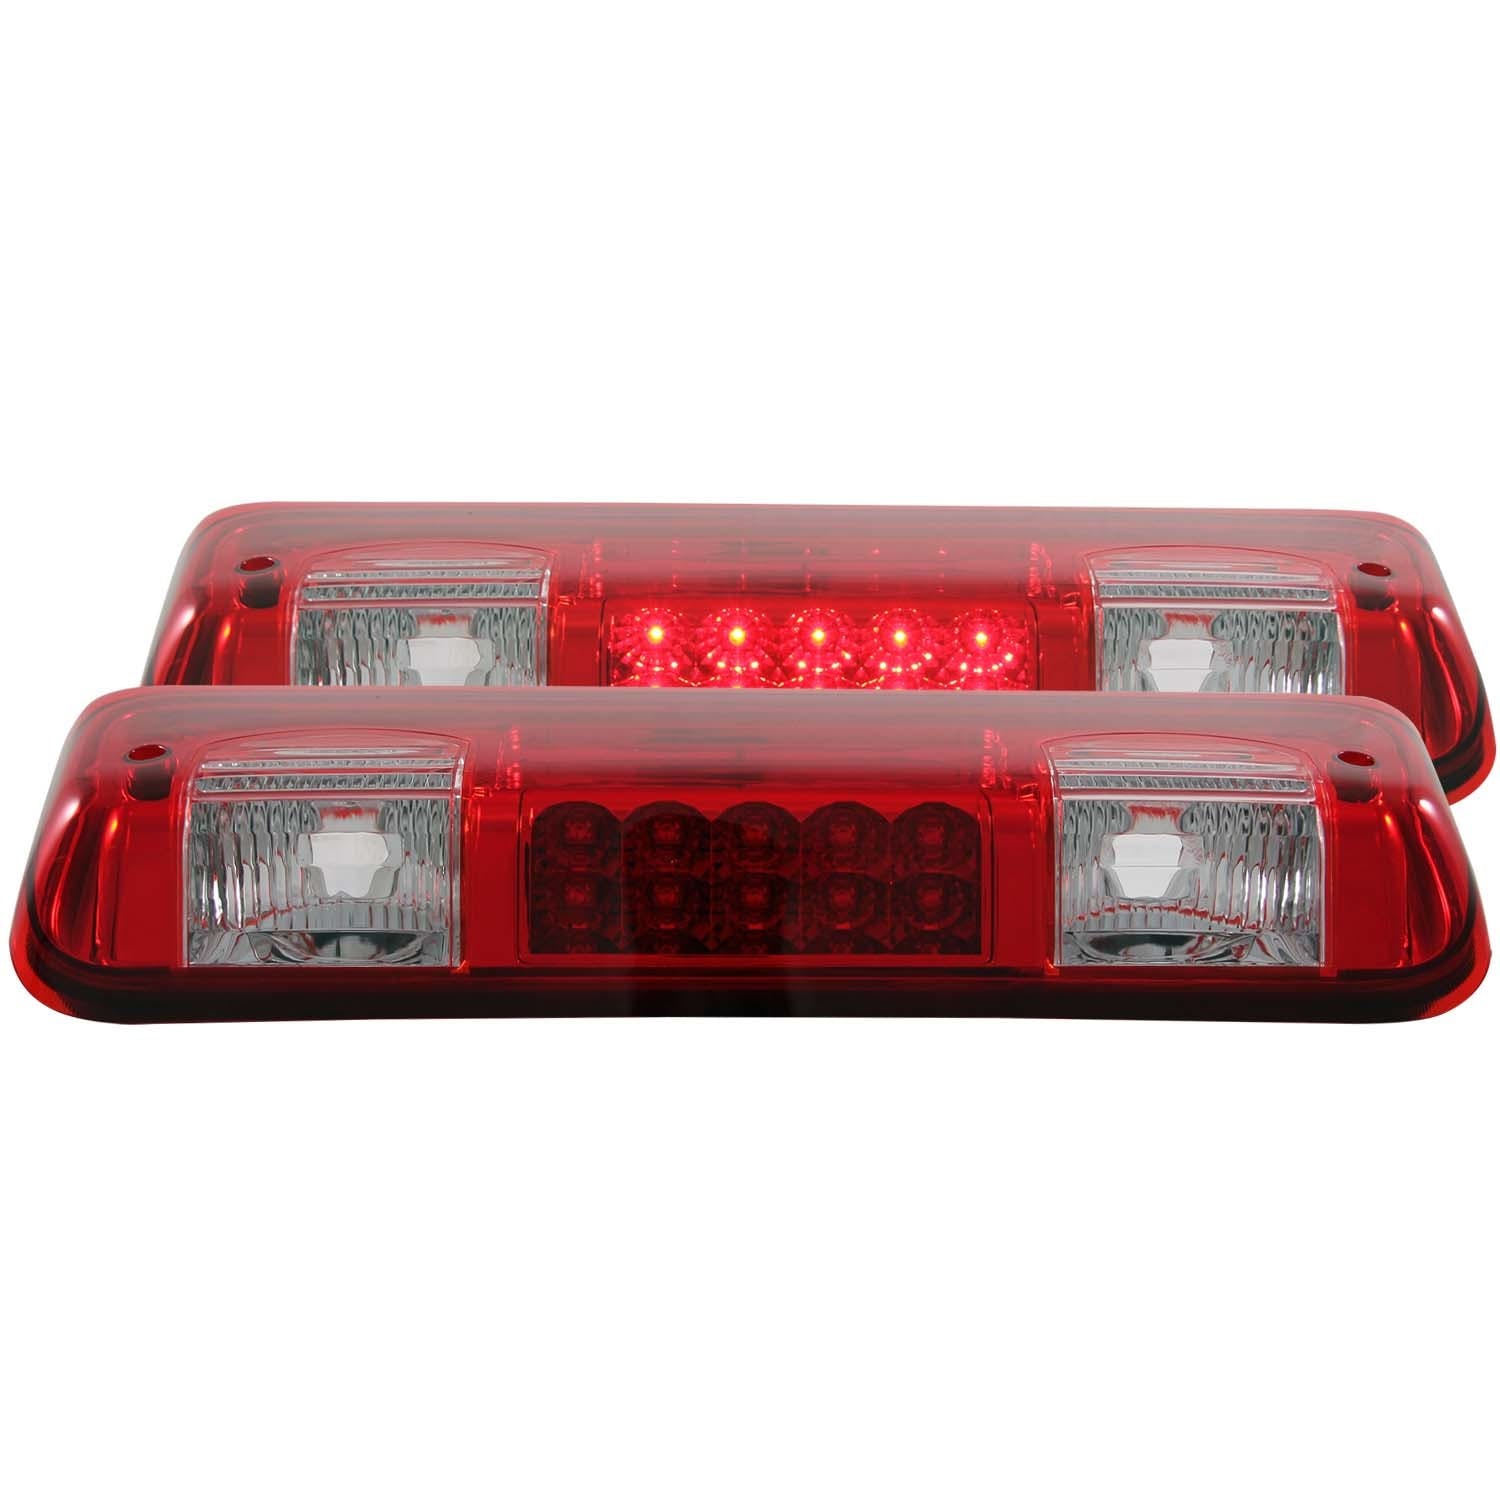 AnzoUSA 531003 LED 3rd Brake Light Red/Clear